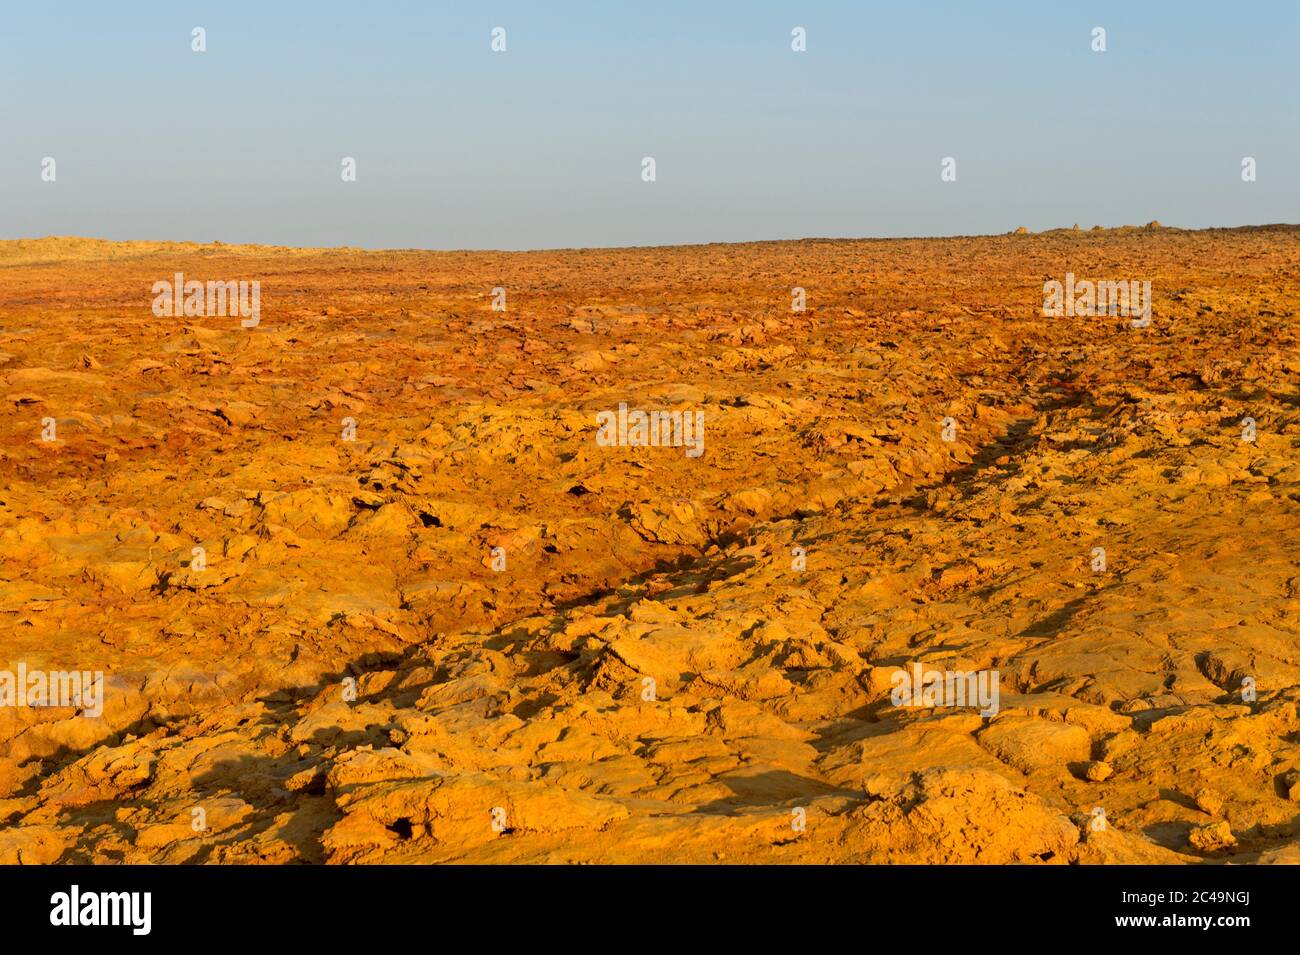 Red-brown volcanic earth with a high concentration of iron oxide in the Dallol geothermal area, Danakil Depression, Afar triangle, Ethiopia Stock Photo